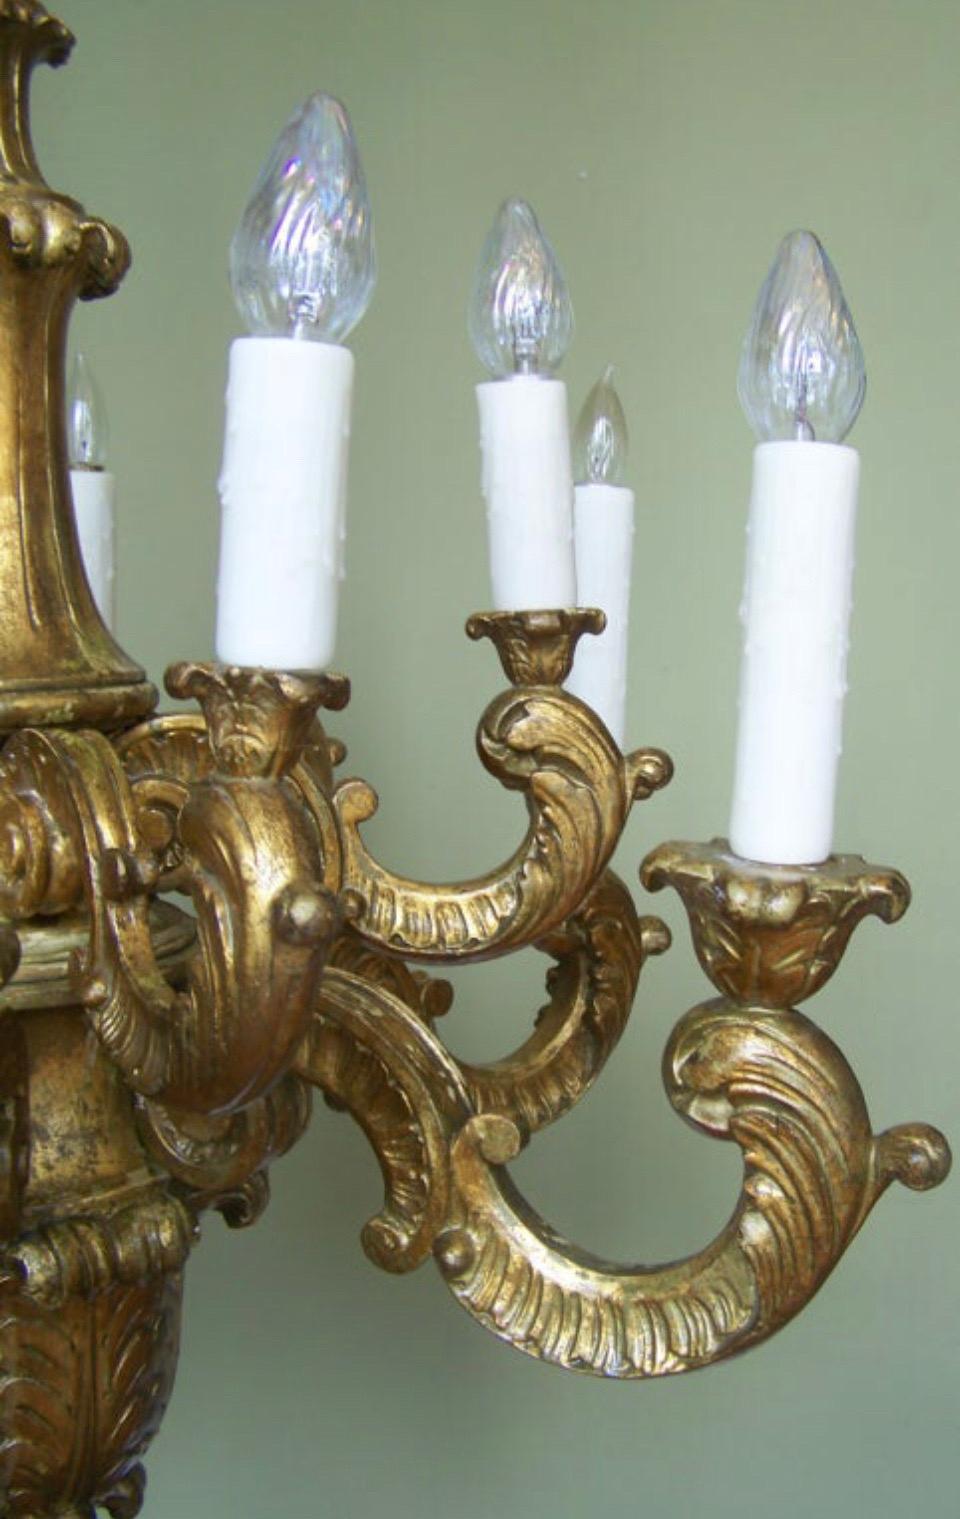 Grand early 20th century Italian hand carved giltwood chandelier features twelve lights in two tiers. The Baroque giltwood chandelier has an impressive hand carved turned stem coming down to four rosettes above a tiered stylized fountain with twelve